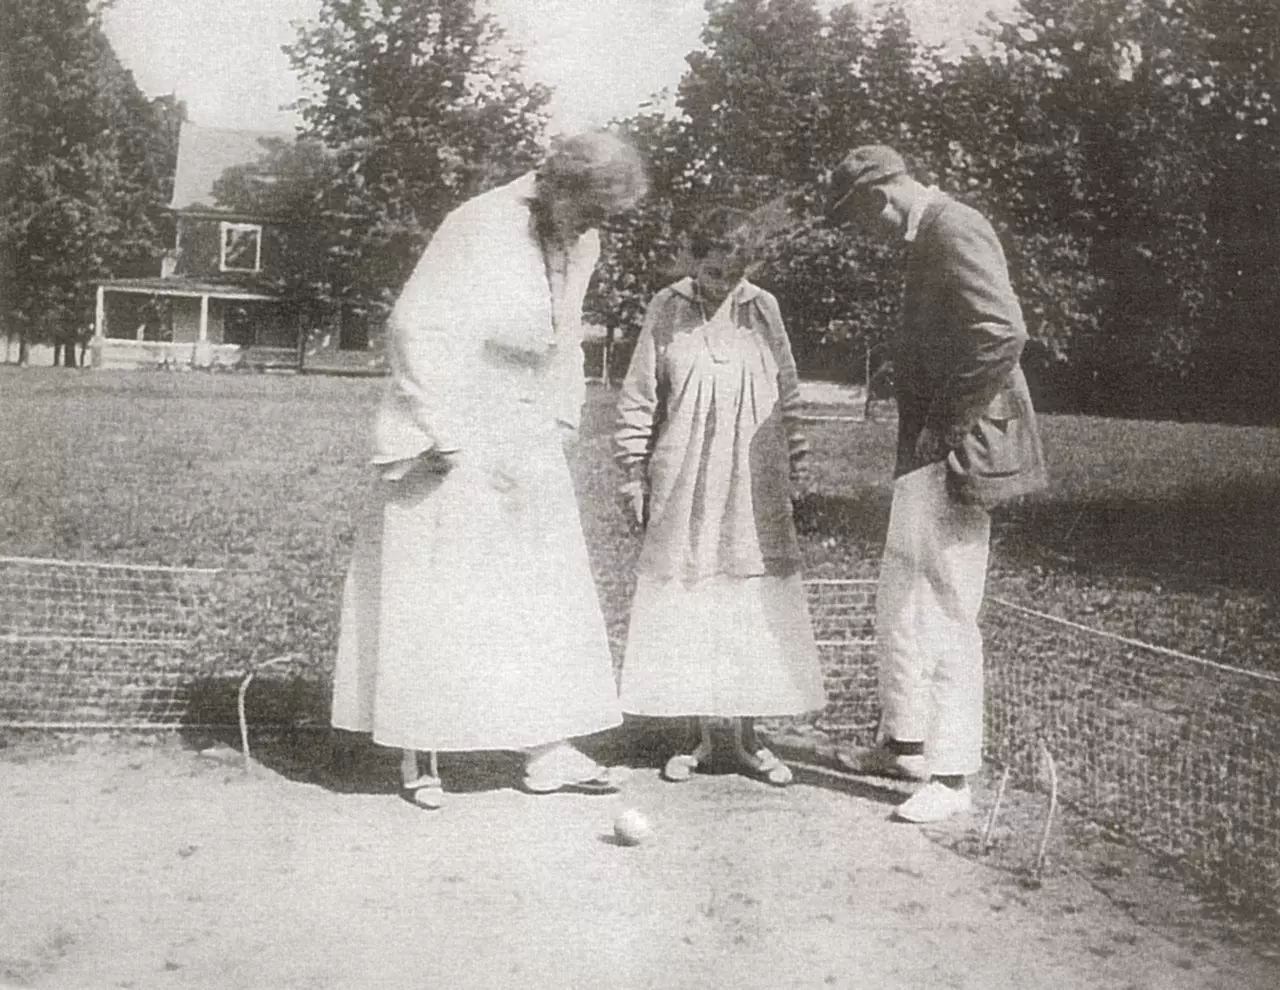 Middle Bass Club: Members playing croquet, circa 1915.